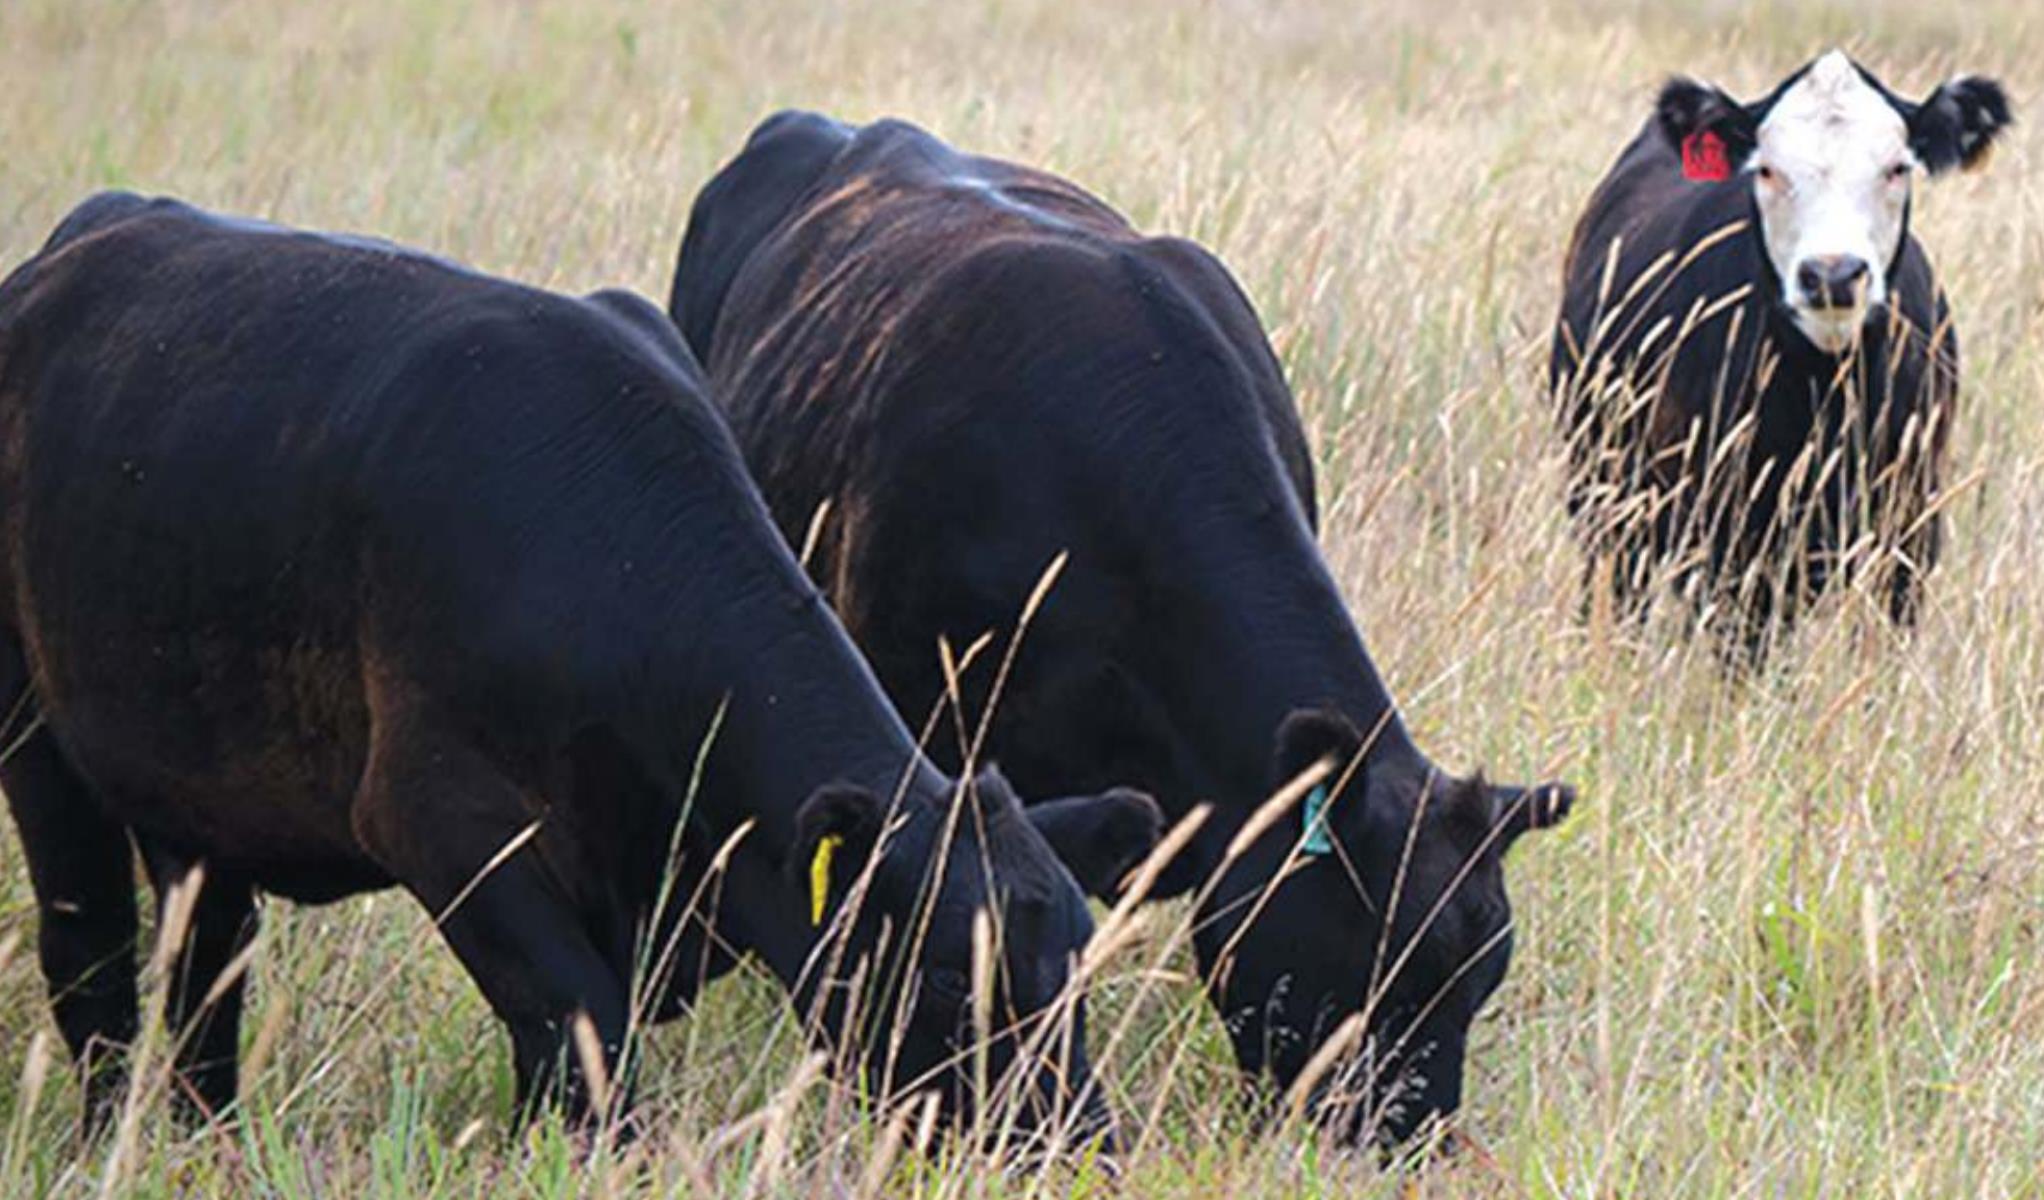 Nutritional requiremnets for beef cattle experience a slgith shift between seasons according to Oklahoma State University Extension specialists. Provided